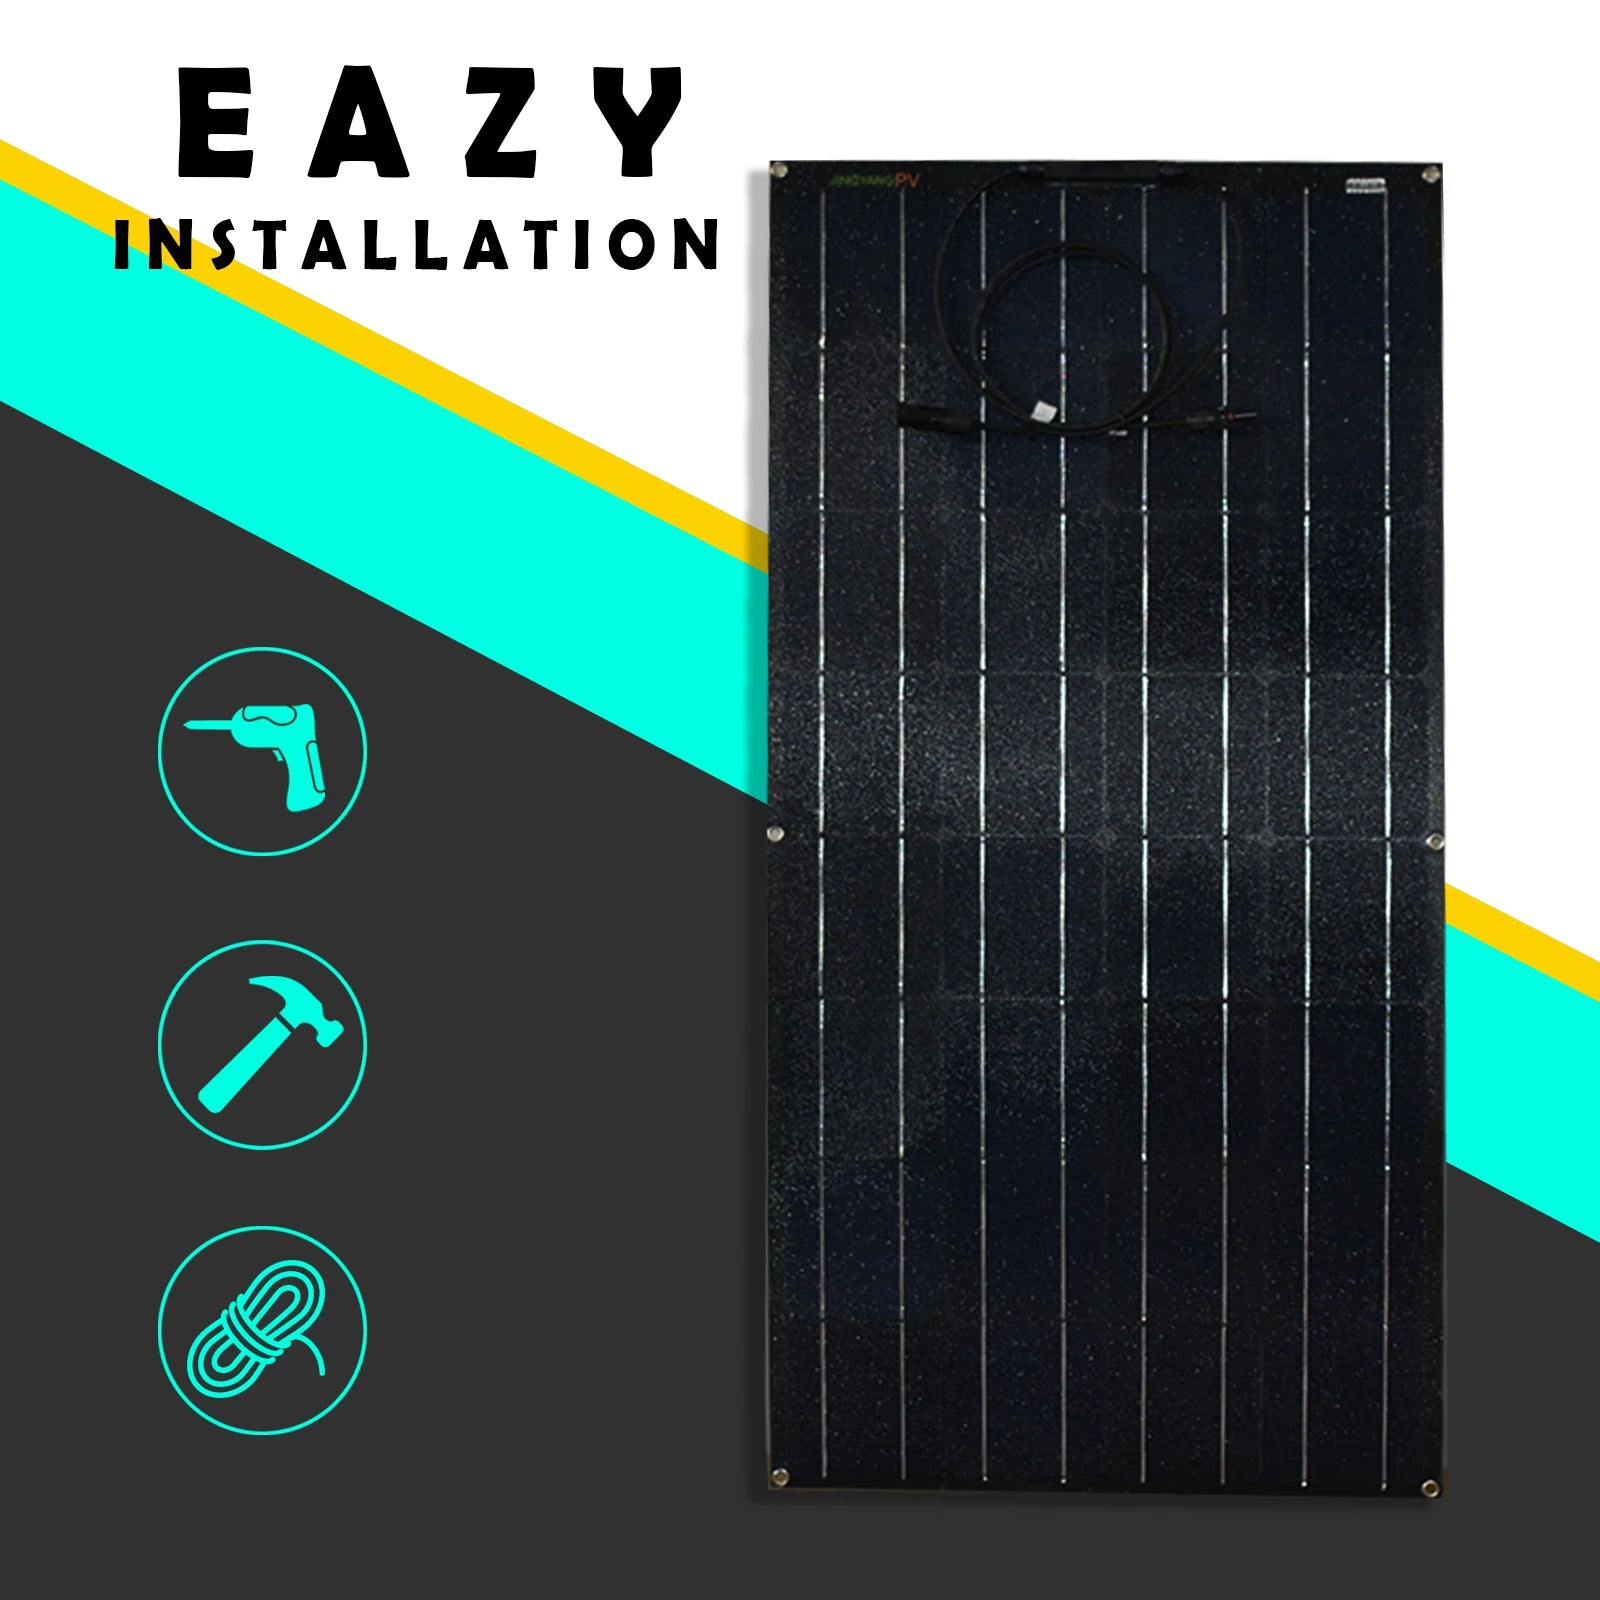 Long-lasting and lightweight, this solar panel provides a reliable energy source.